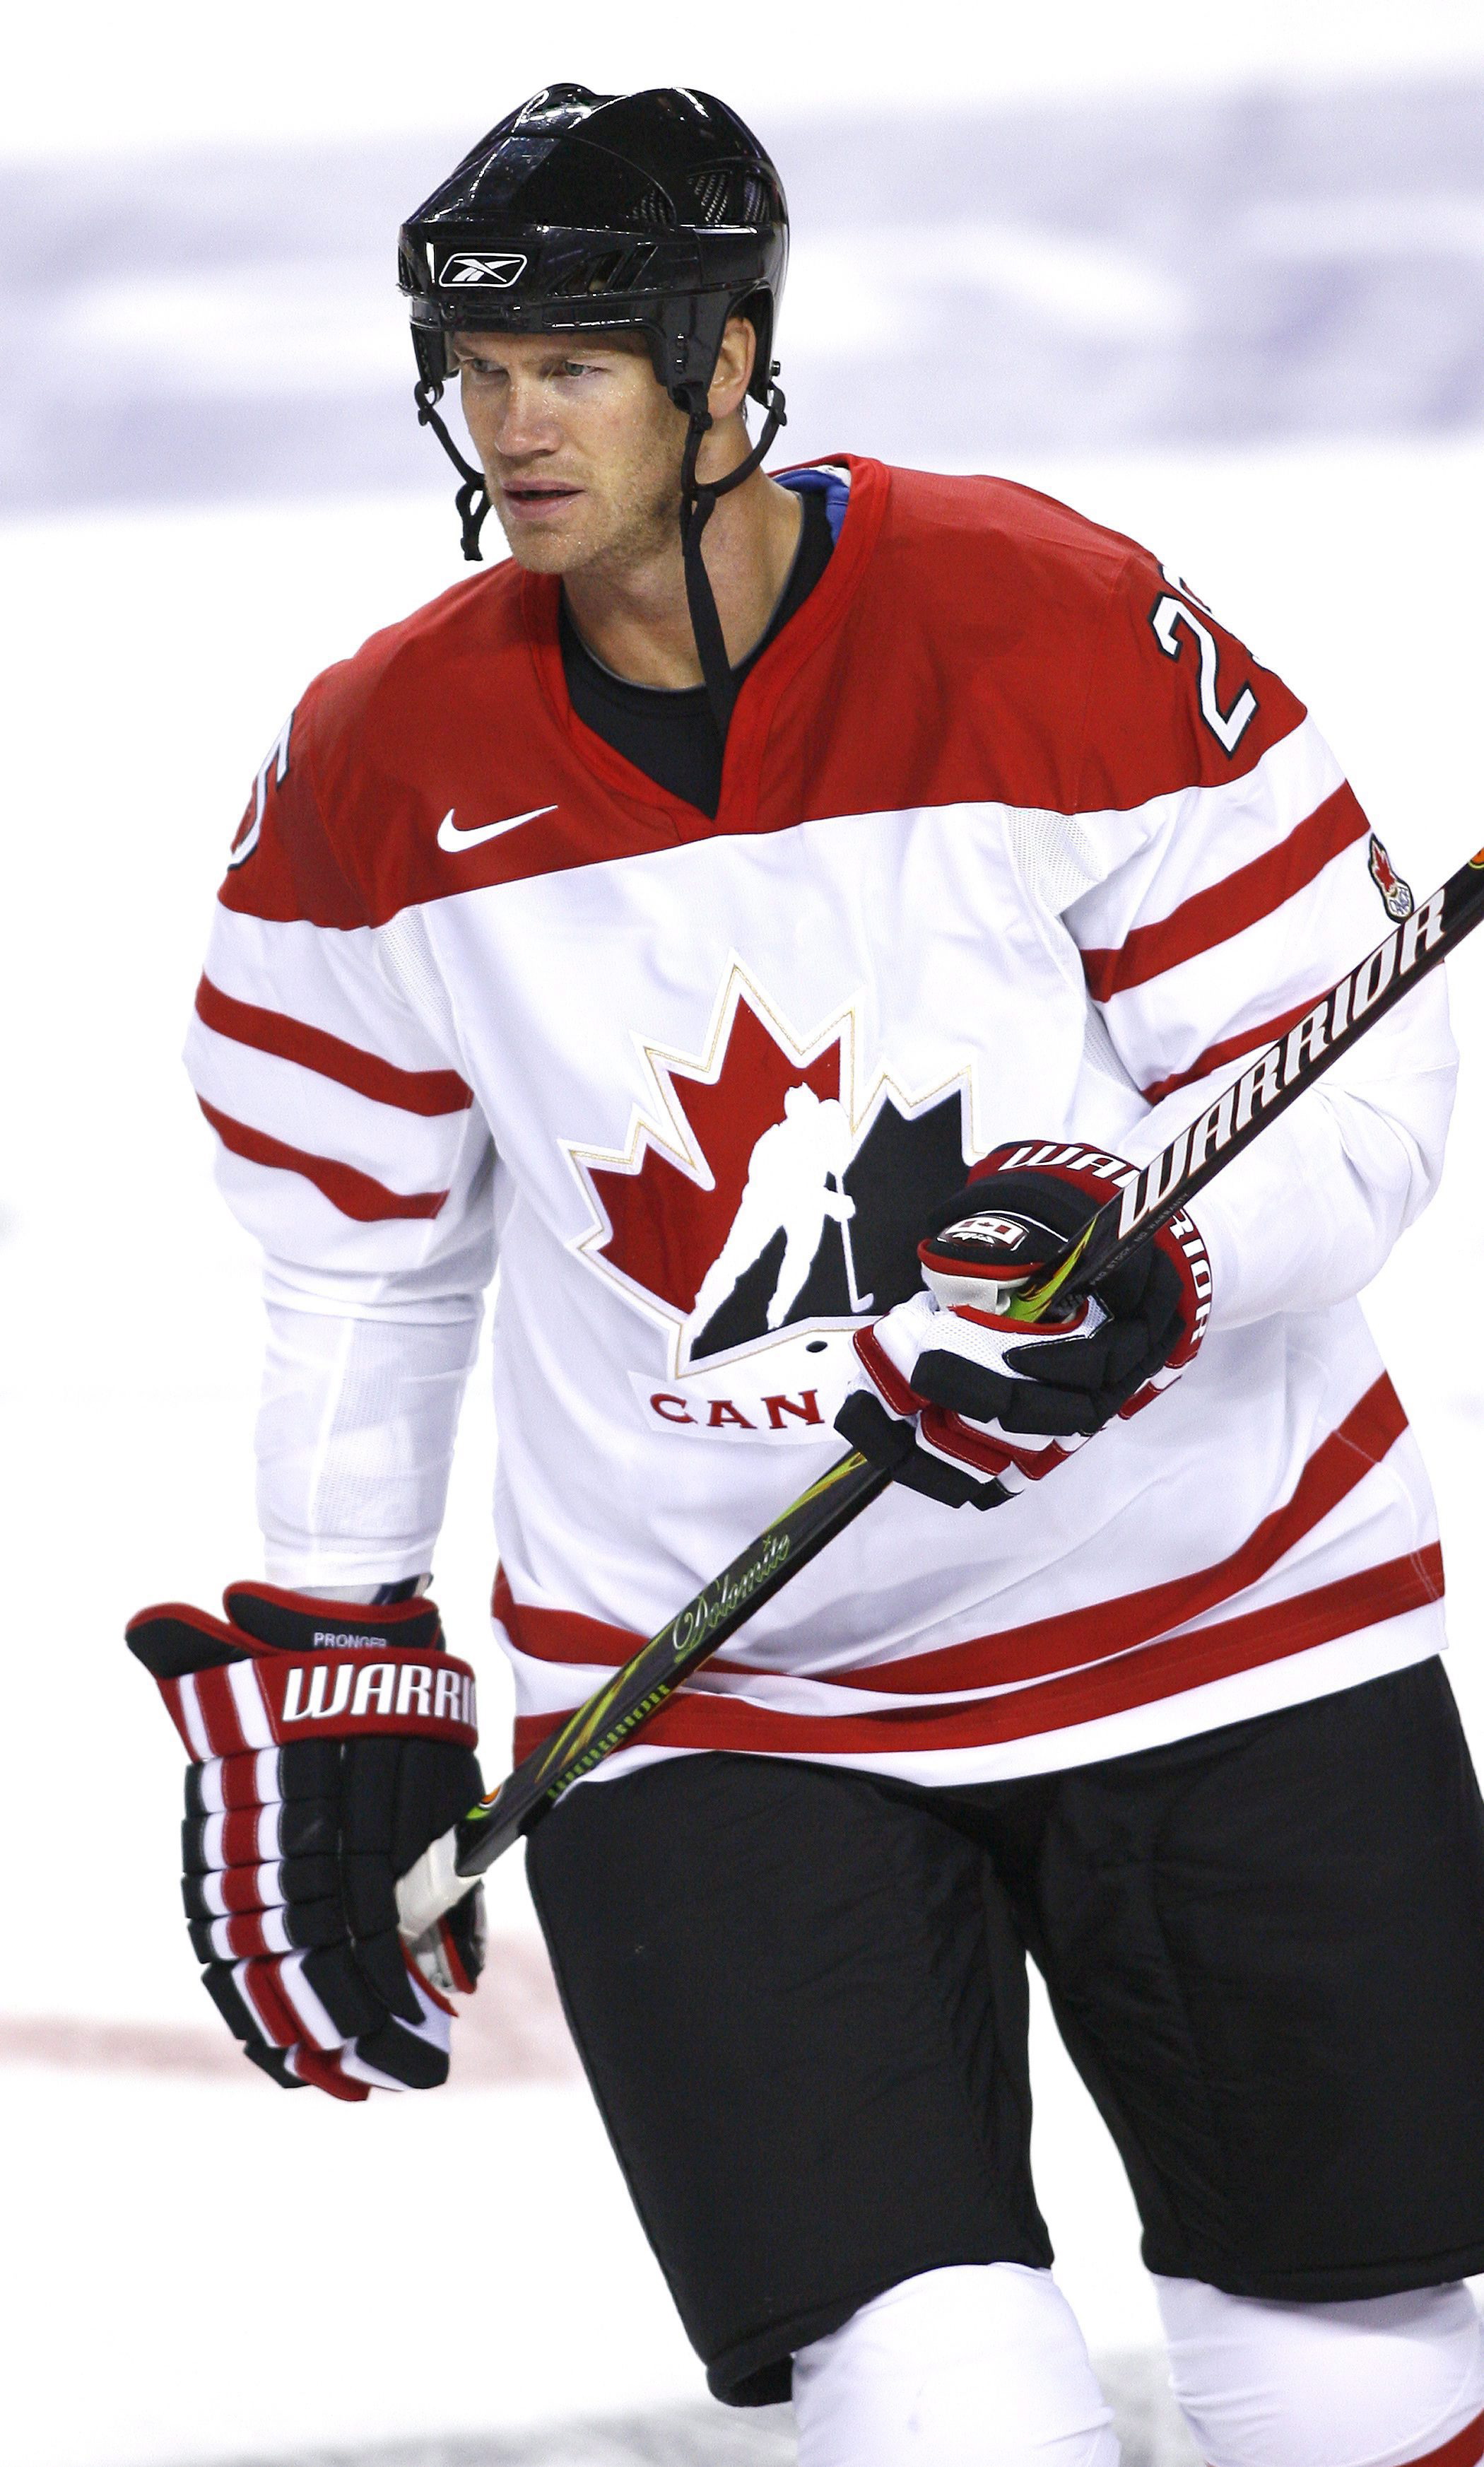 Most Popular Canadian Hockey Players: Top 5